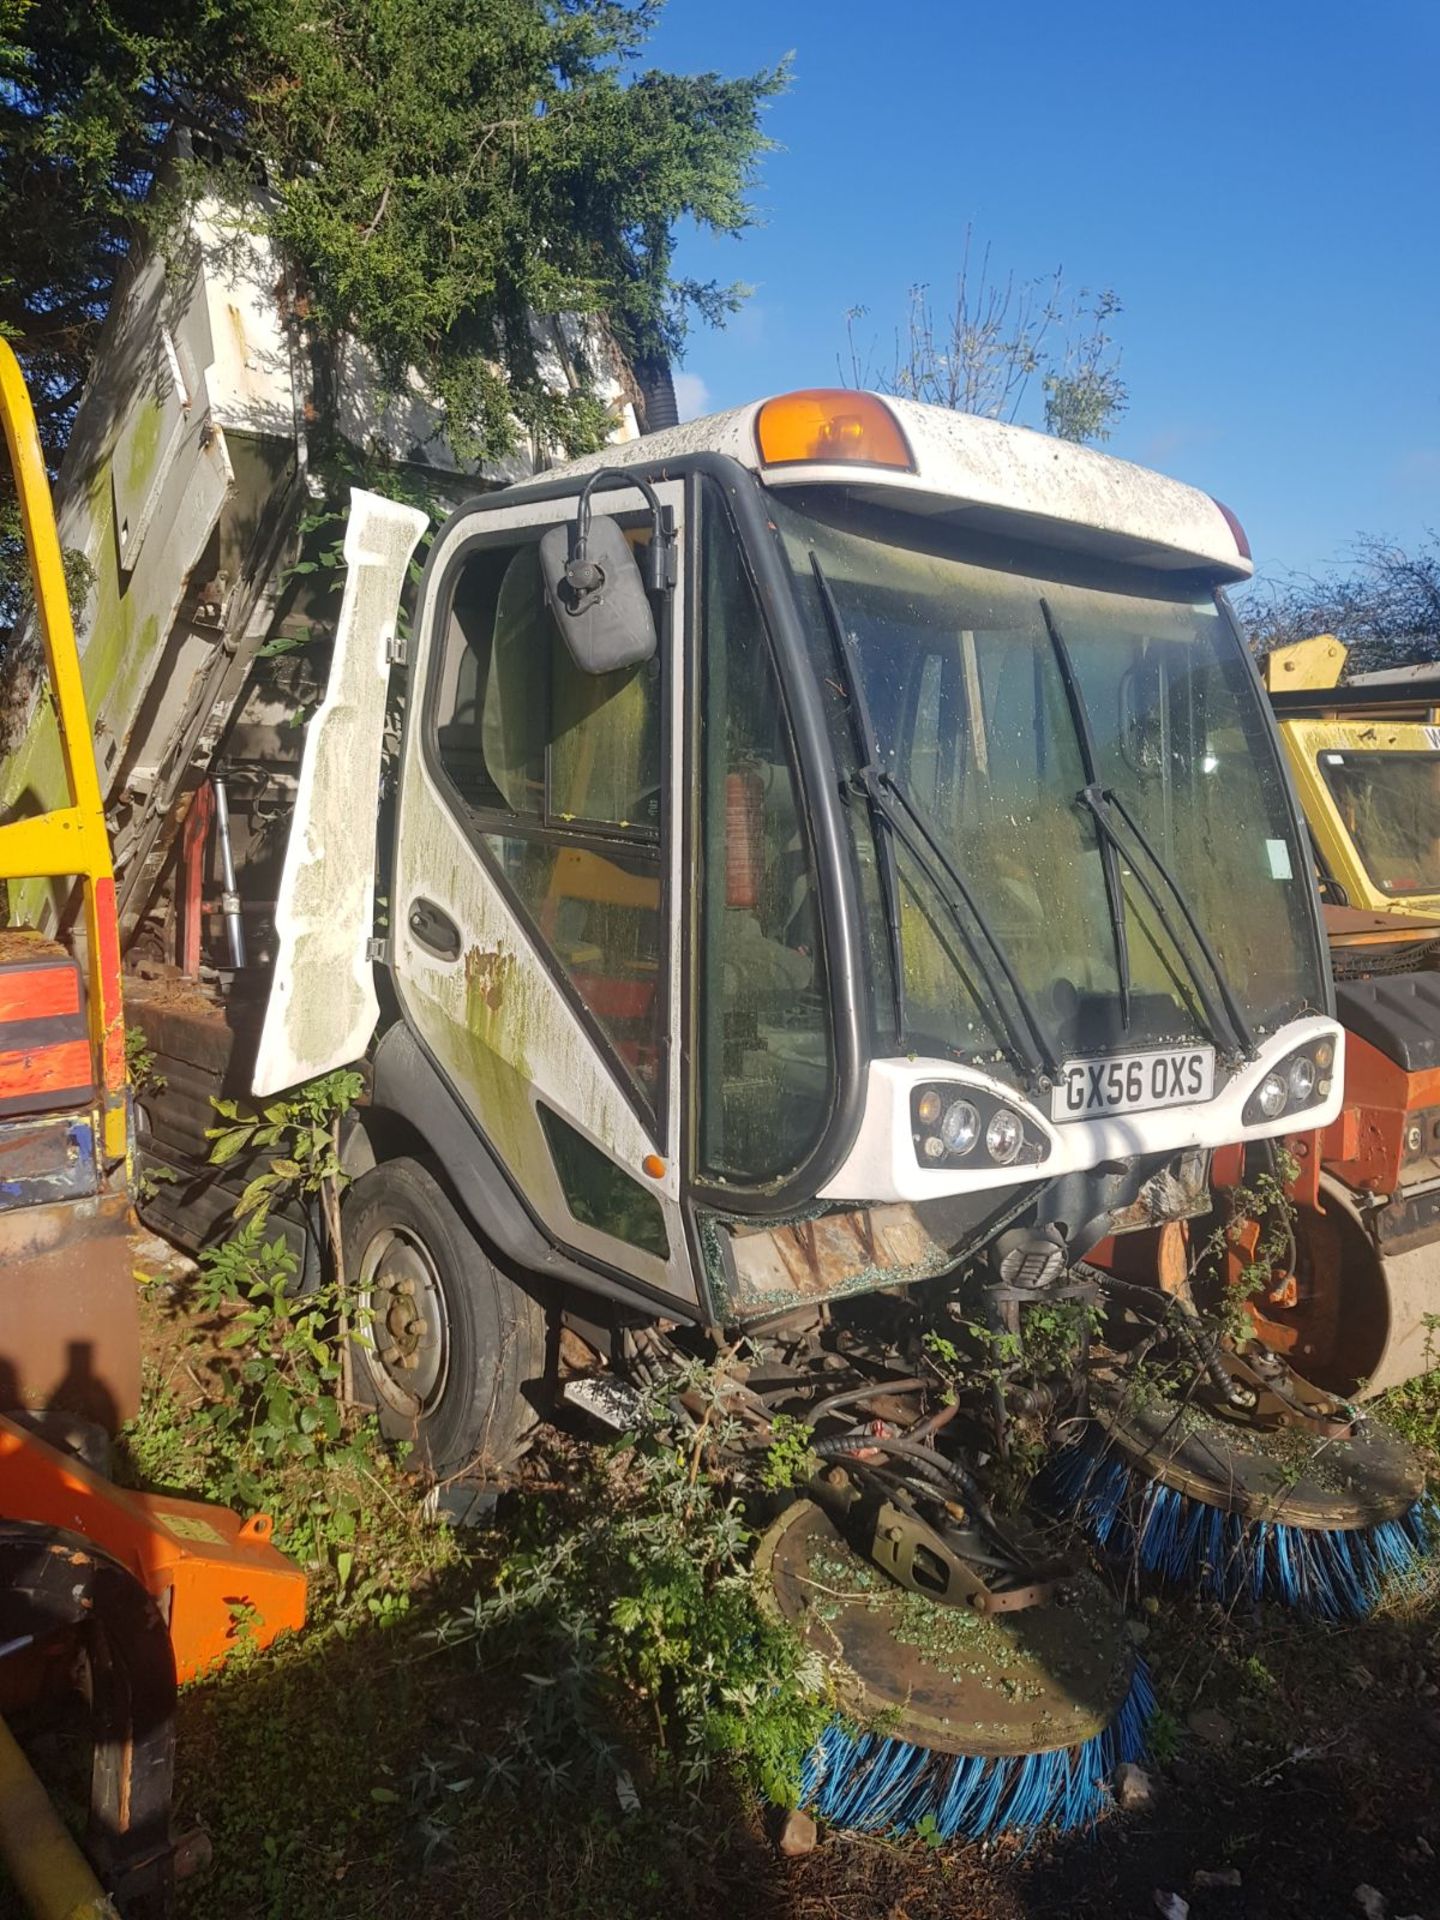 2006/56 JOHNSTON SWEEPER 158B 101T SELLING AS SPARES / REPAIRS, SHOWING 0 FORMER KEEPERS *PLUS VAT*